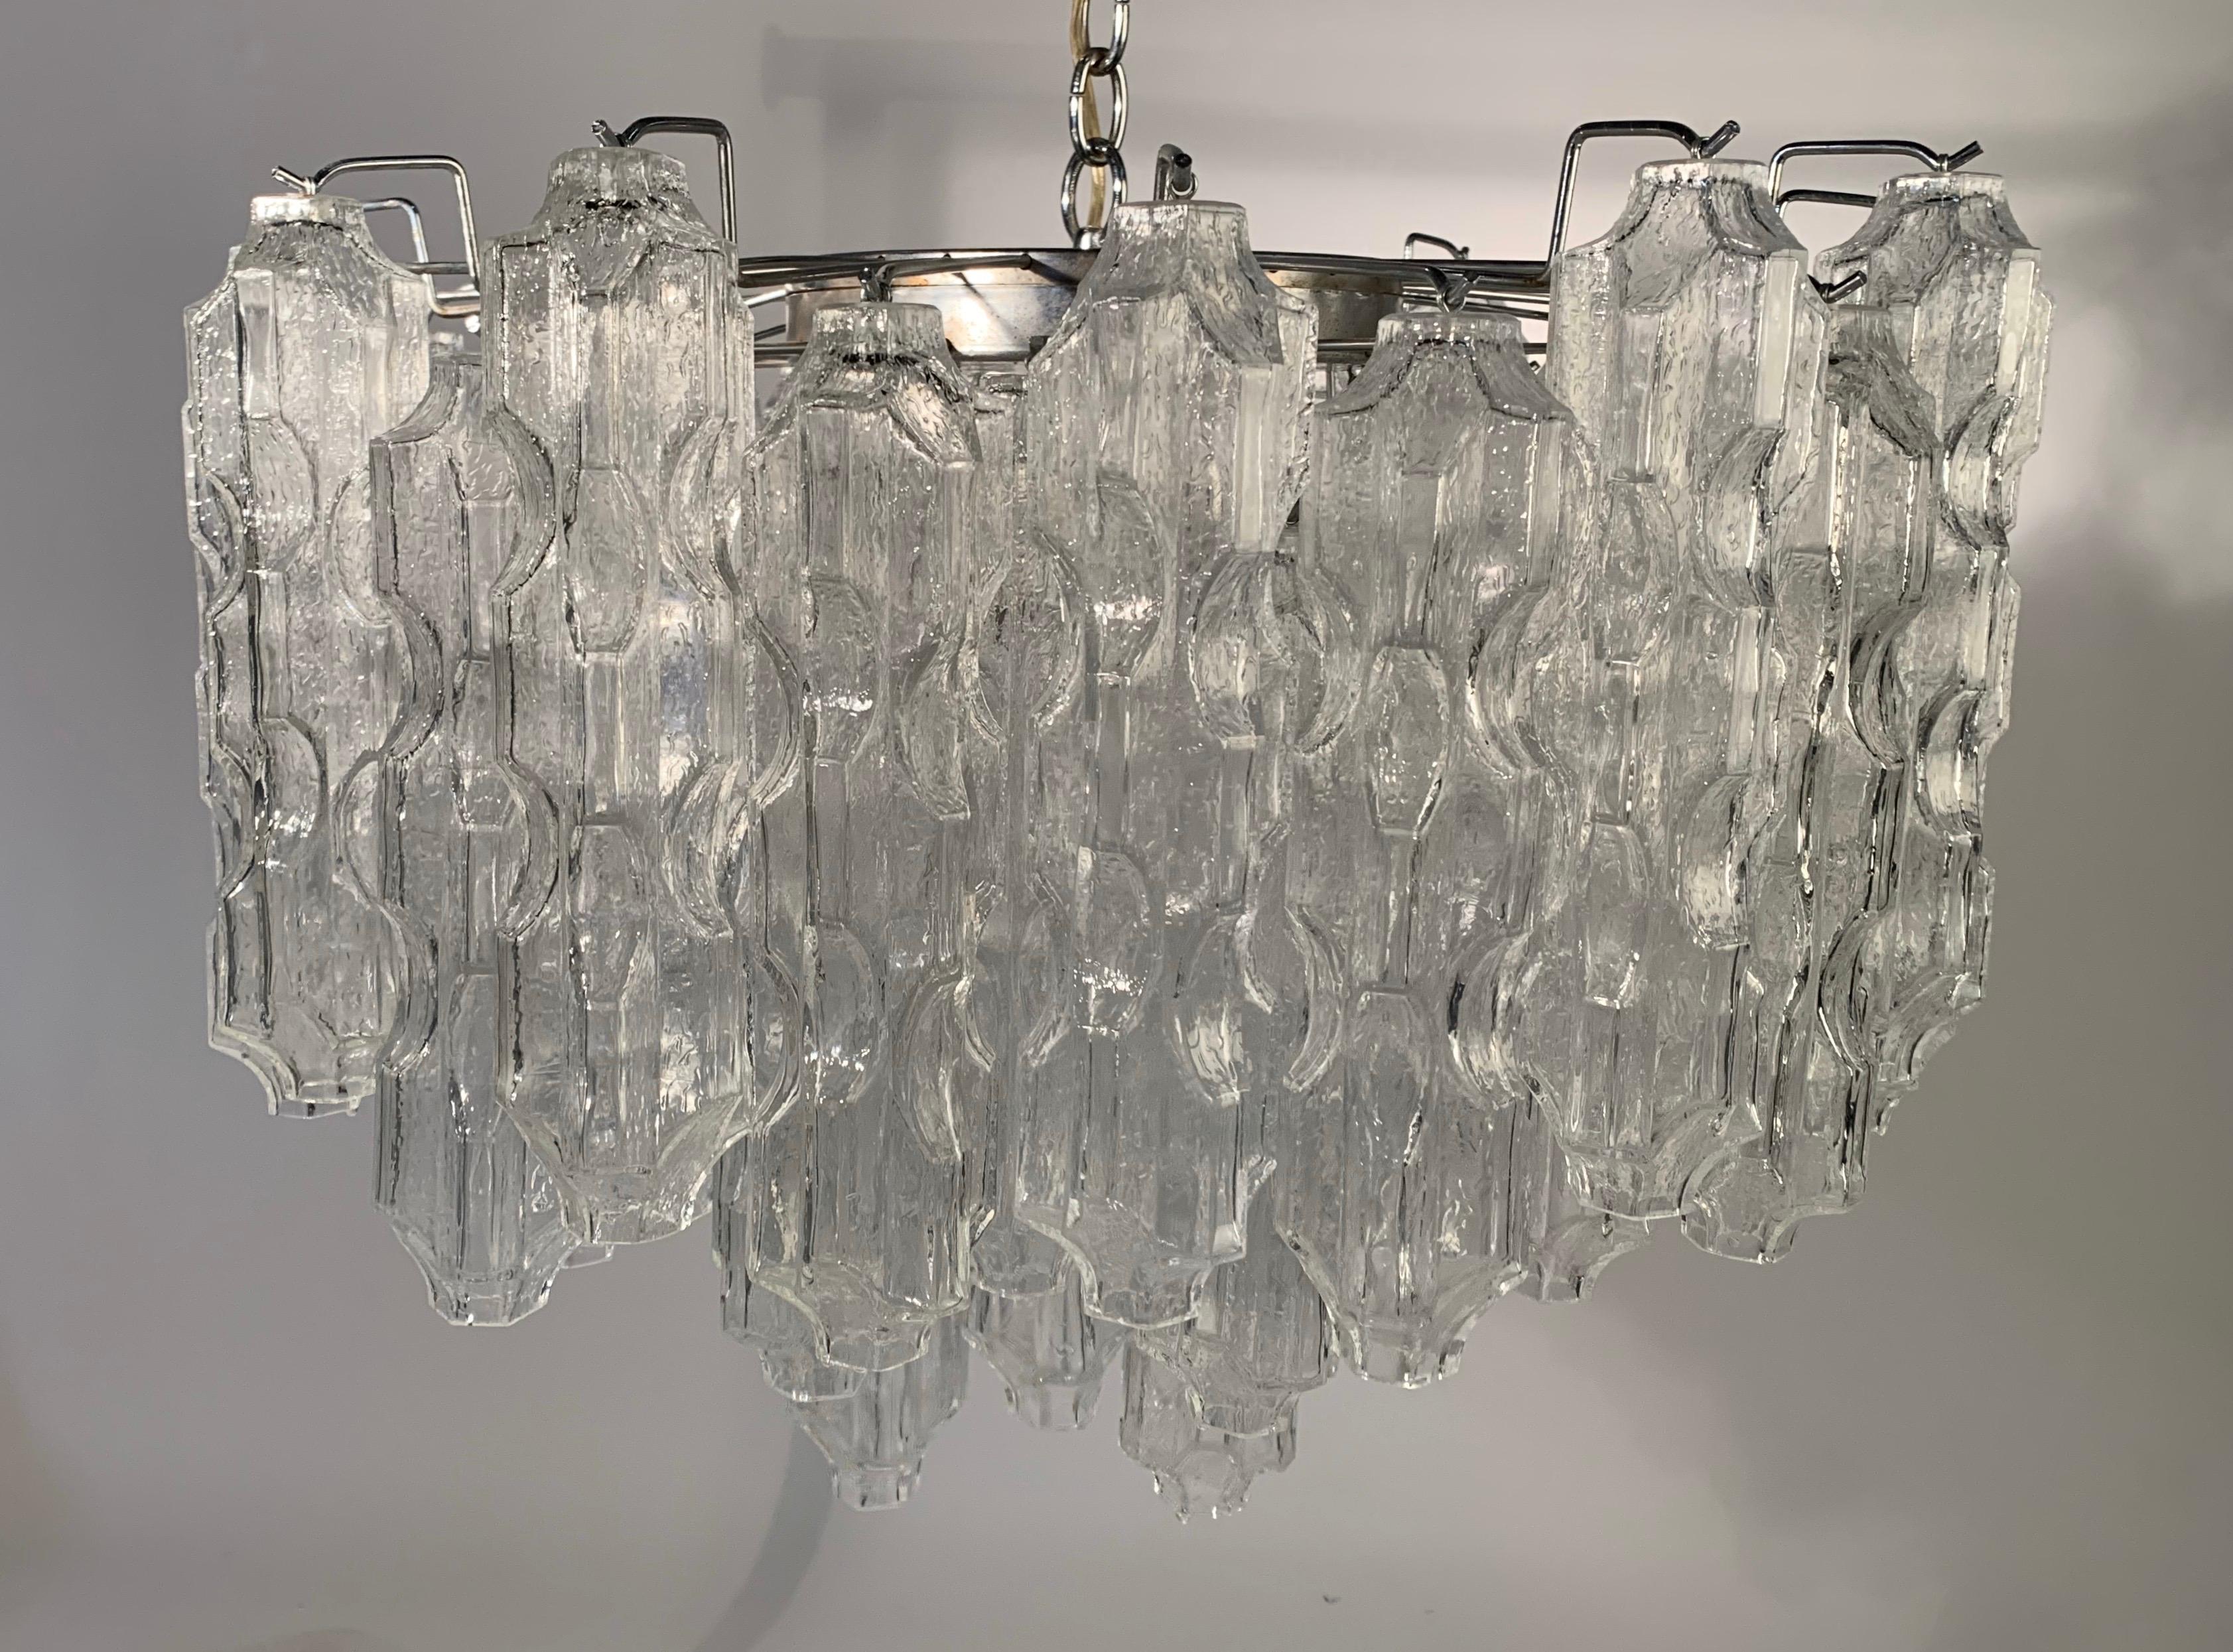 A rare chandelier designed by Carlo Scarpa for Venini Italy having 54 12” Murano glass globes. This chandelier is stunning to say the least. It will absolutely grab any eye that enters the room that it exists in.
Shipping will be courier hand